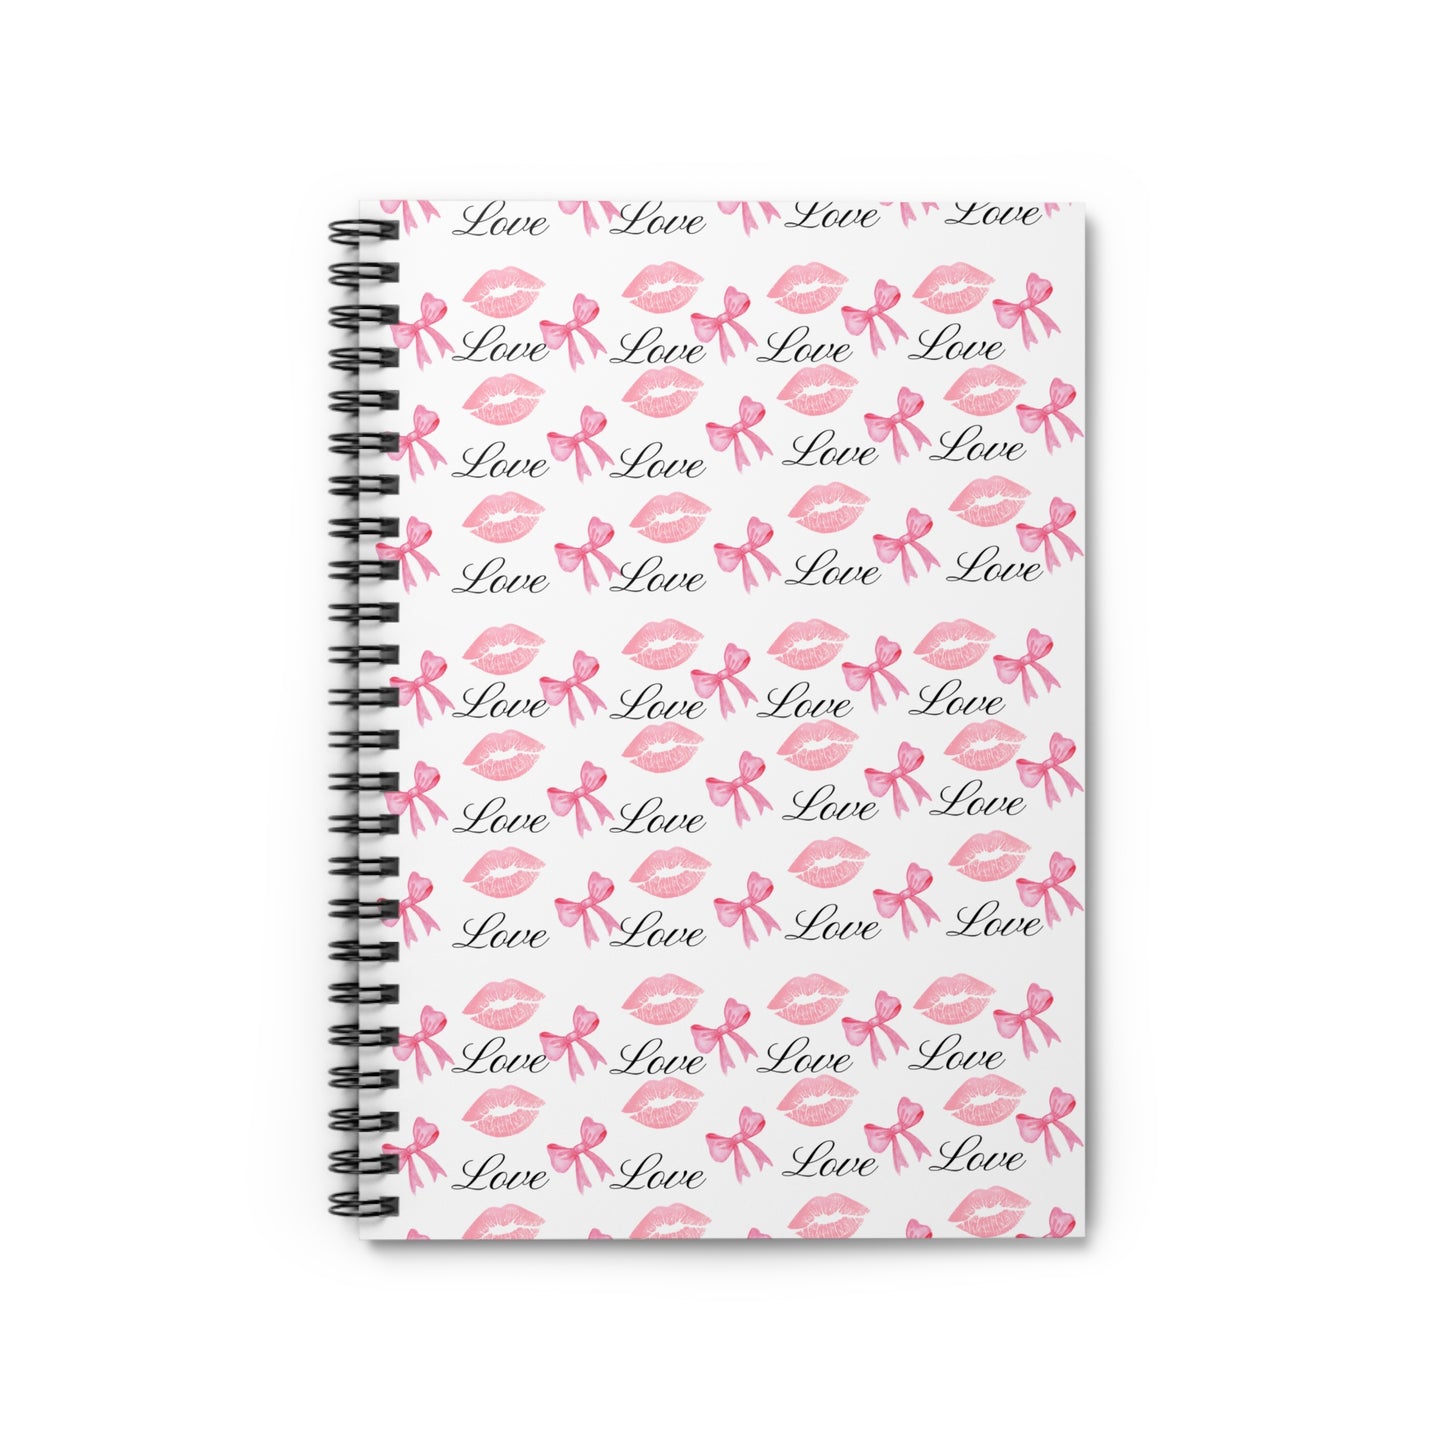 BOW LOVE Spiral Notebook - Ruled Line